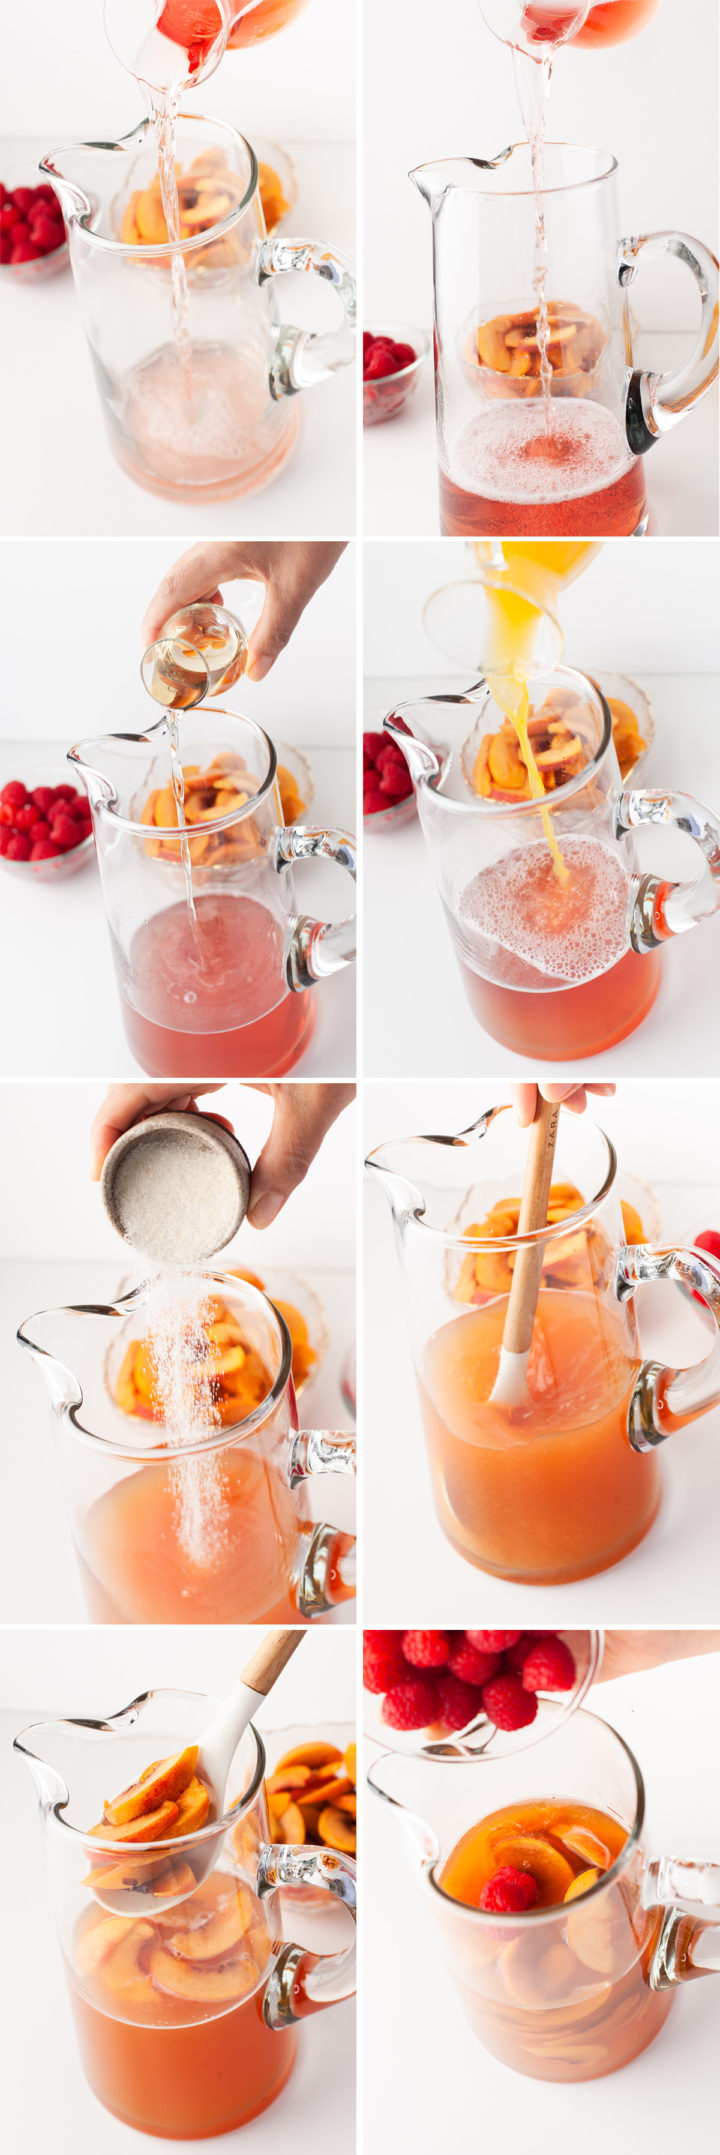 step by step photos showing how to make a recipe for peach sangria